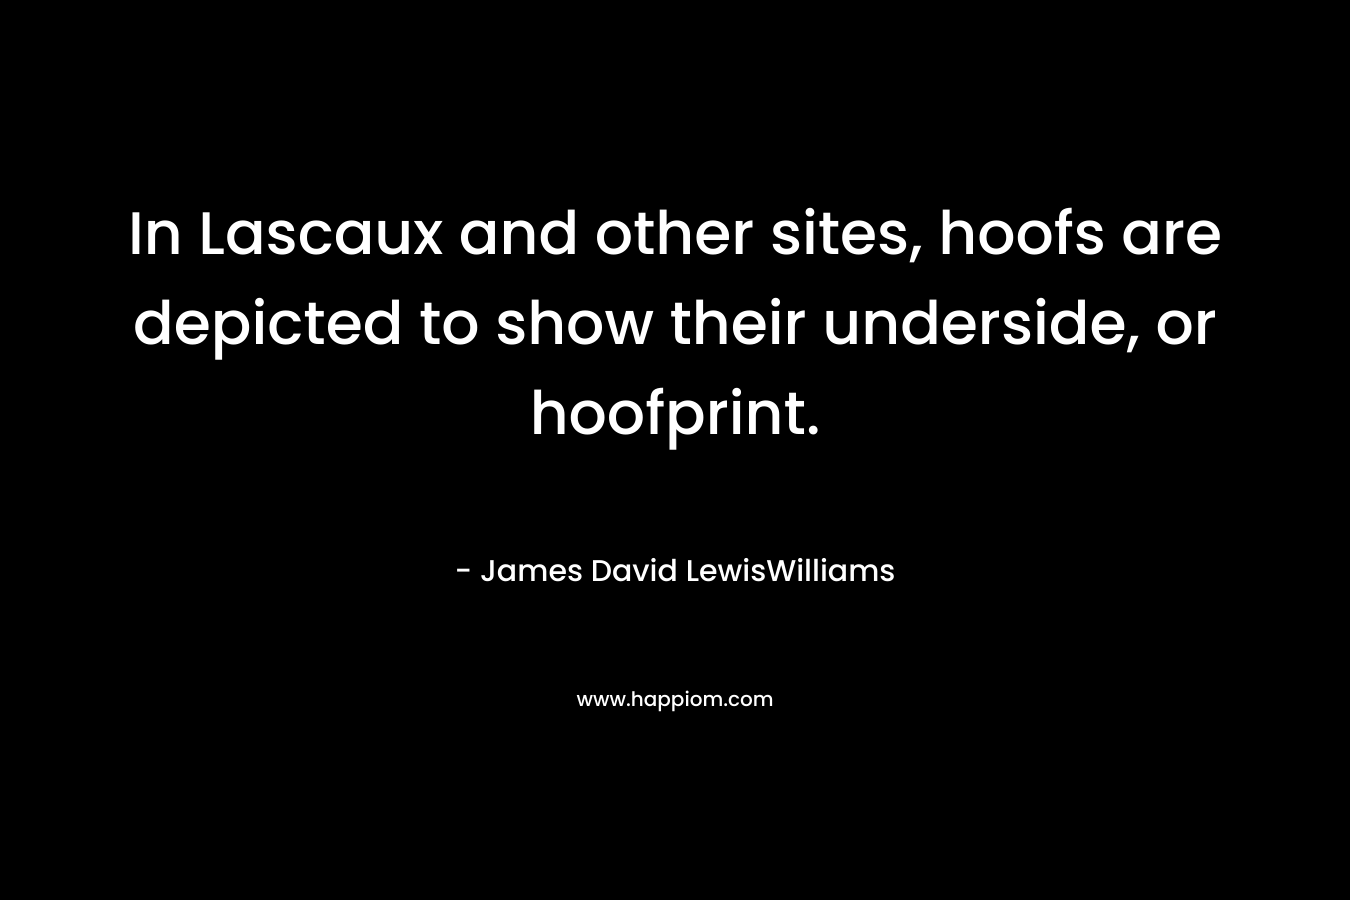 In Lascaux and other sites, hoofs are depicted to show their underside, or hoofprint. – James David LewisWilliams